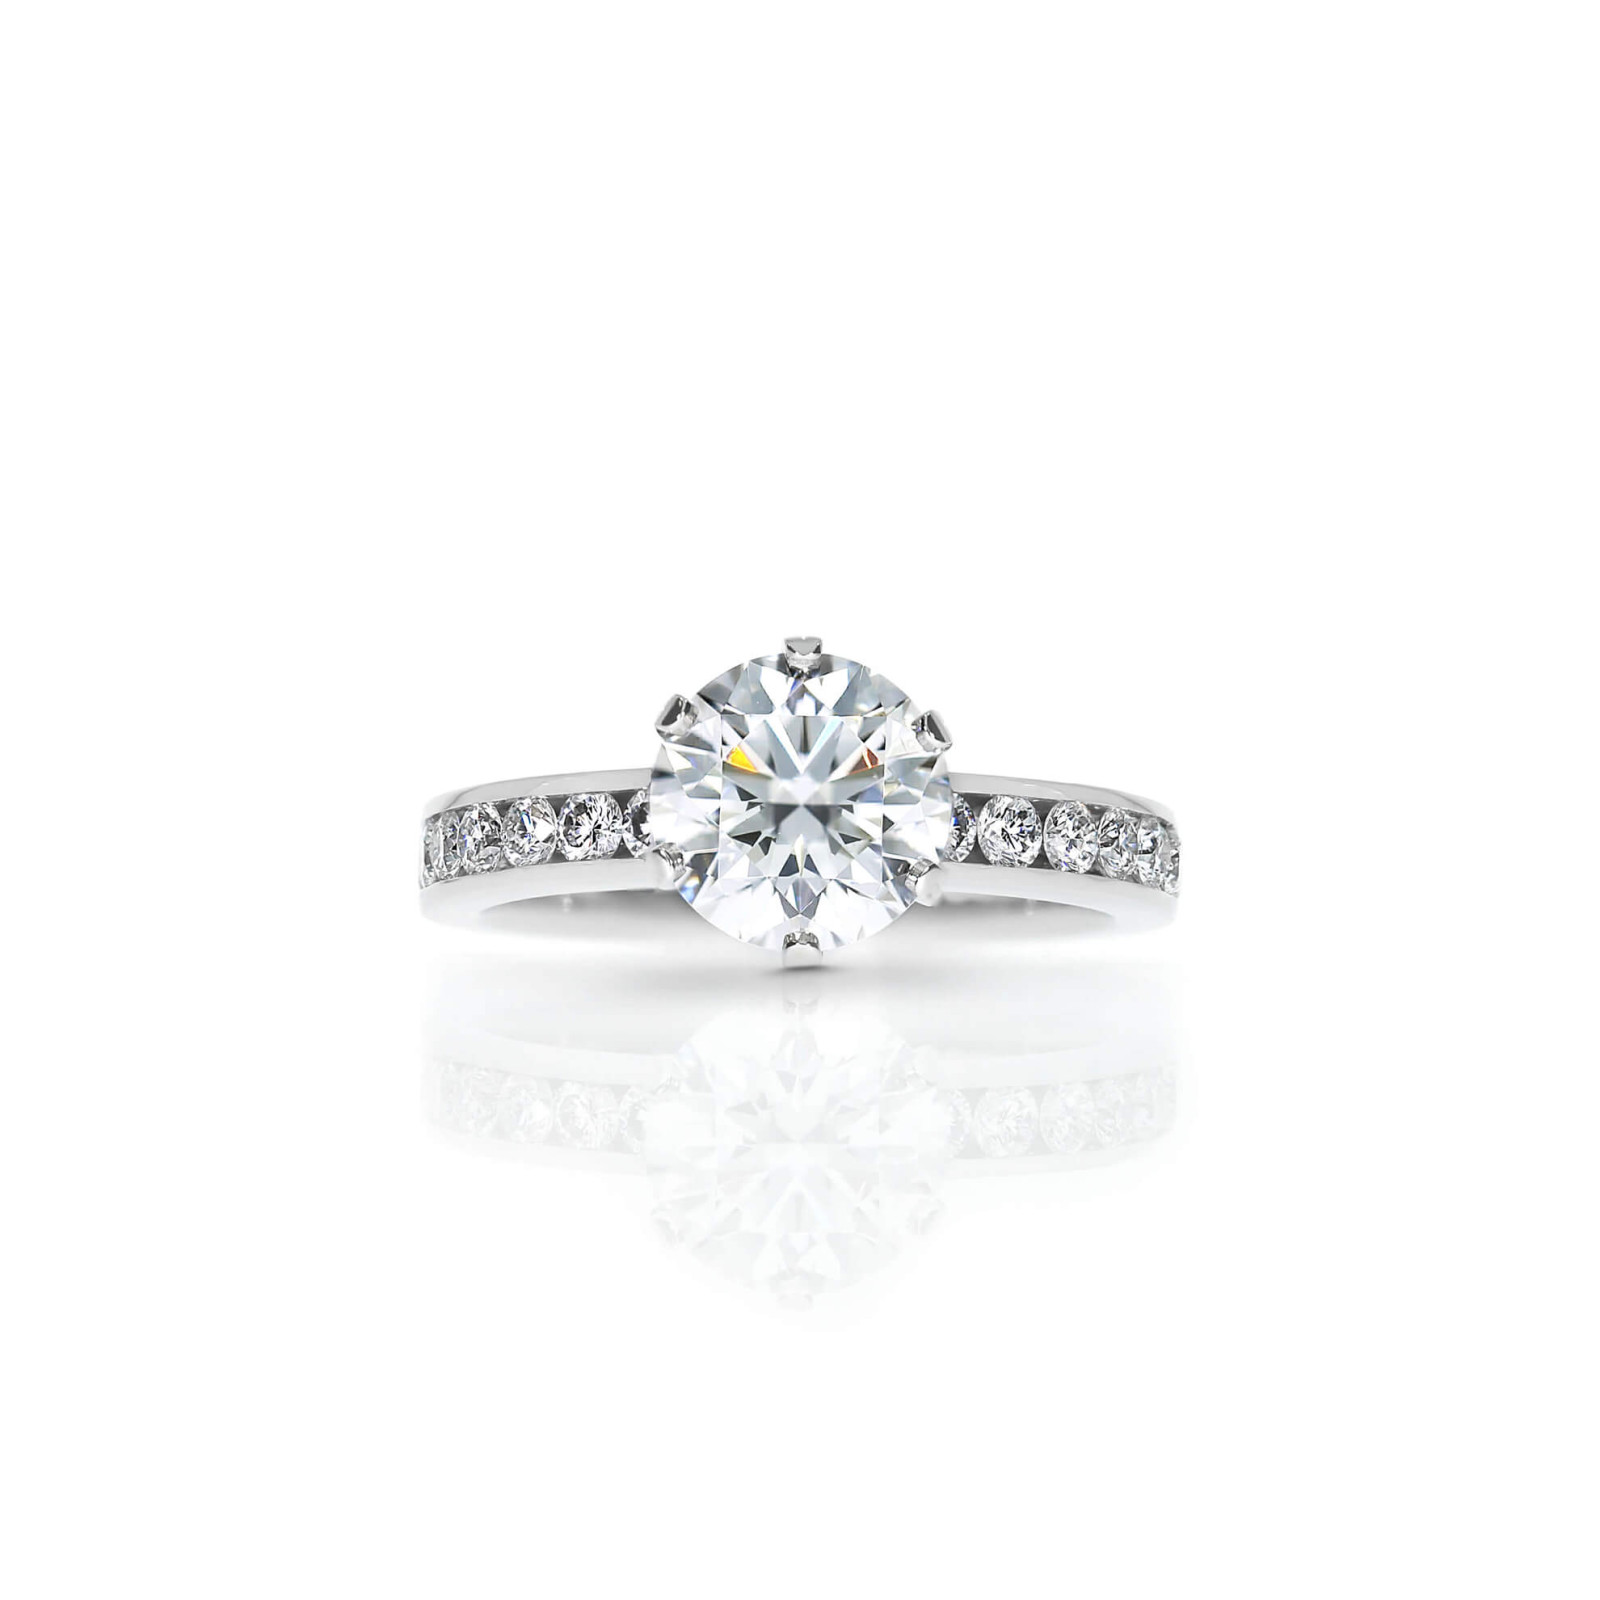 Six Claw Round Diamond Engagement Ring with Channel Set Diamond Band